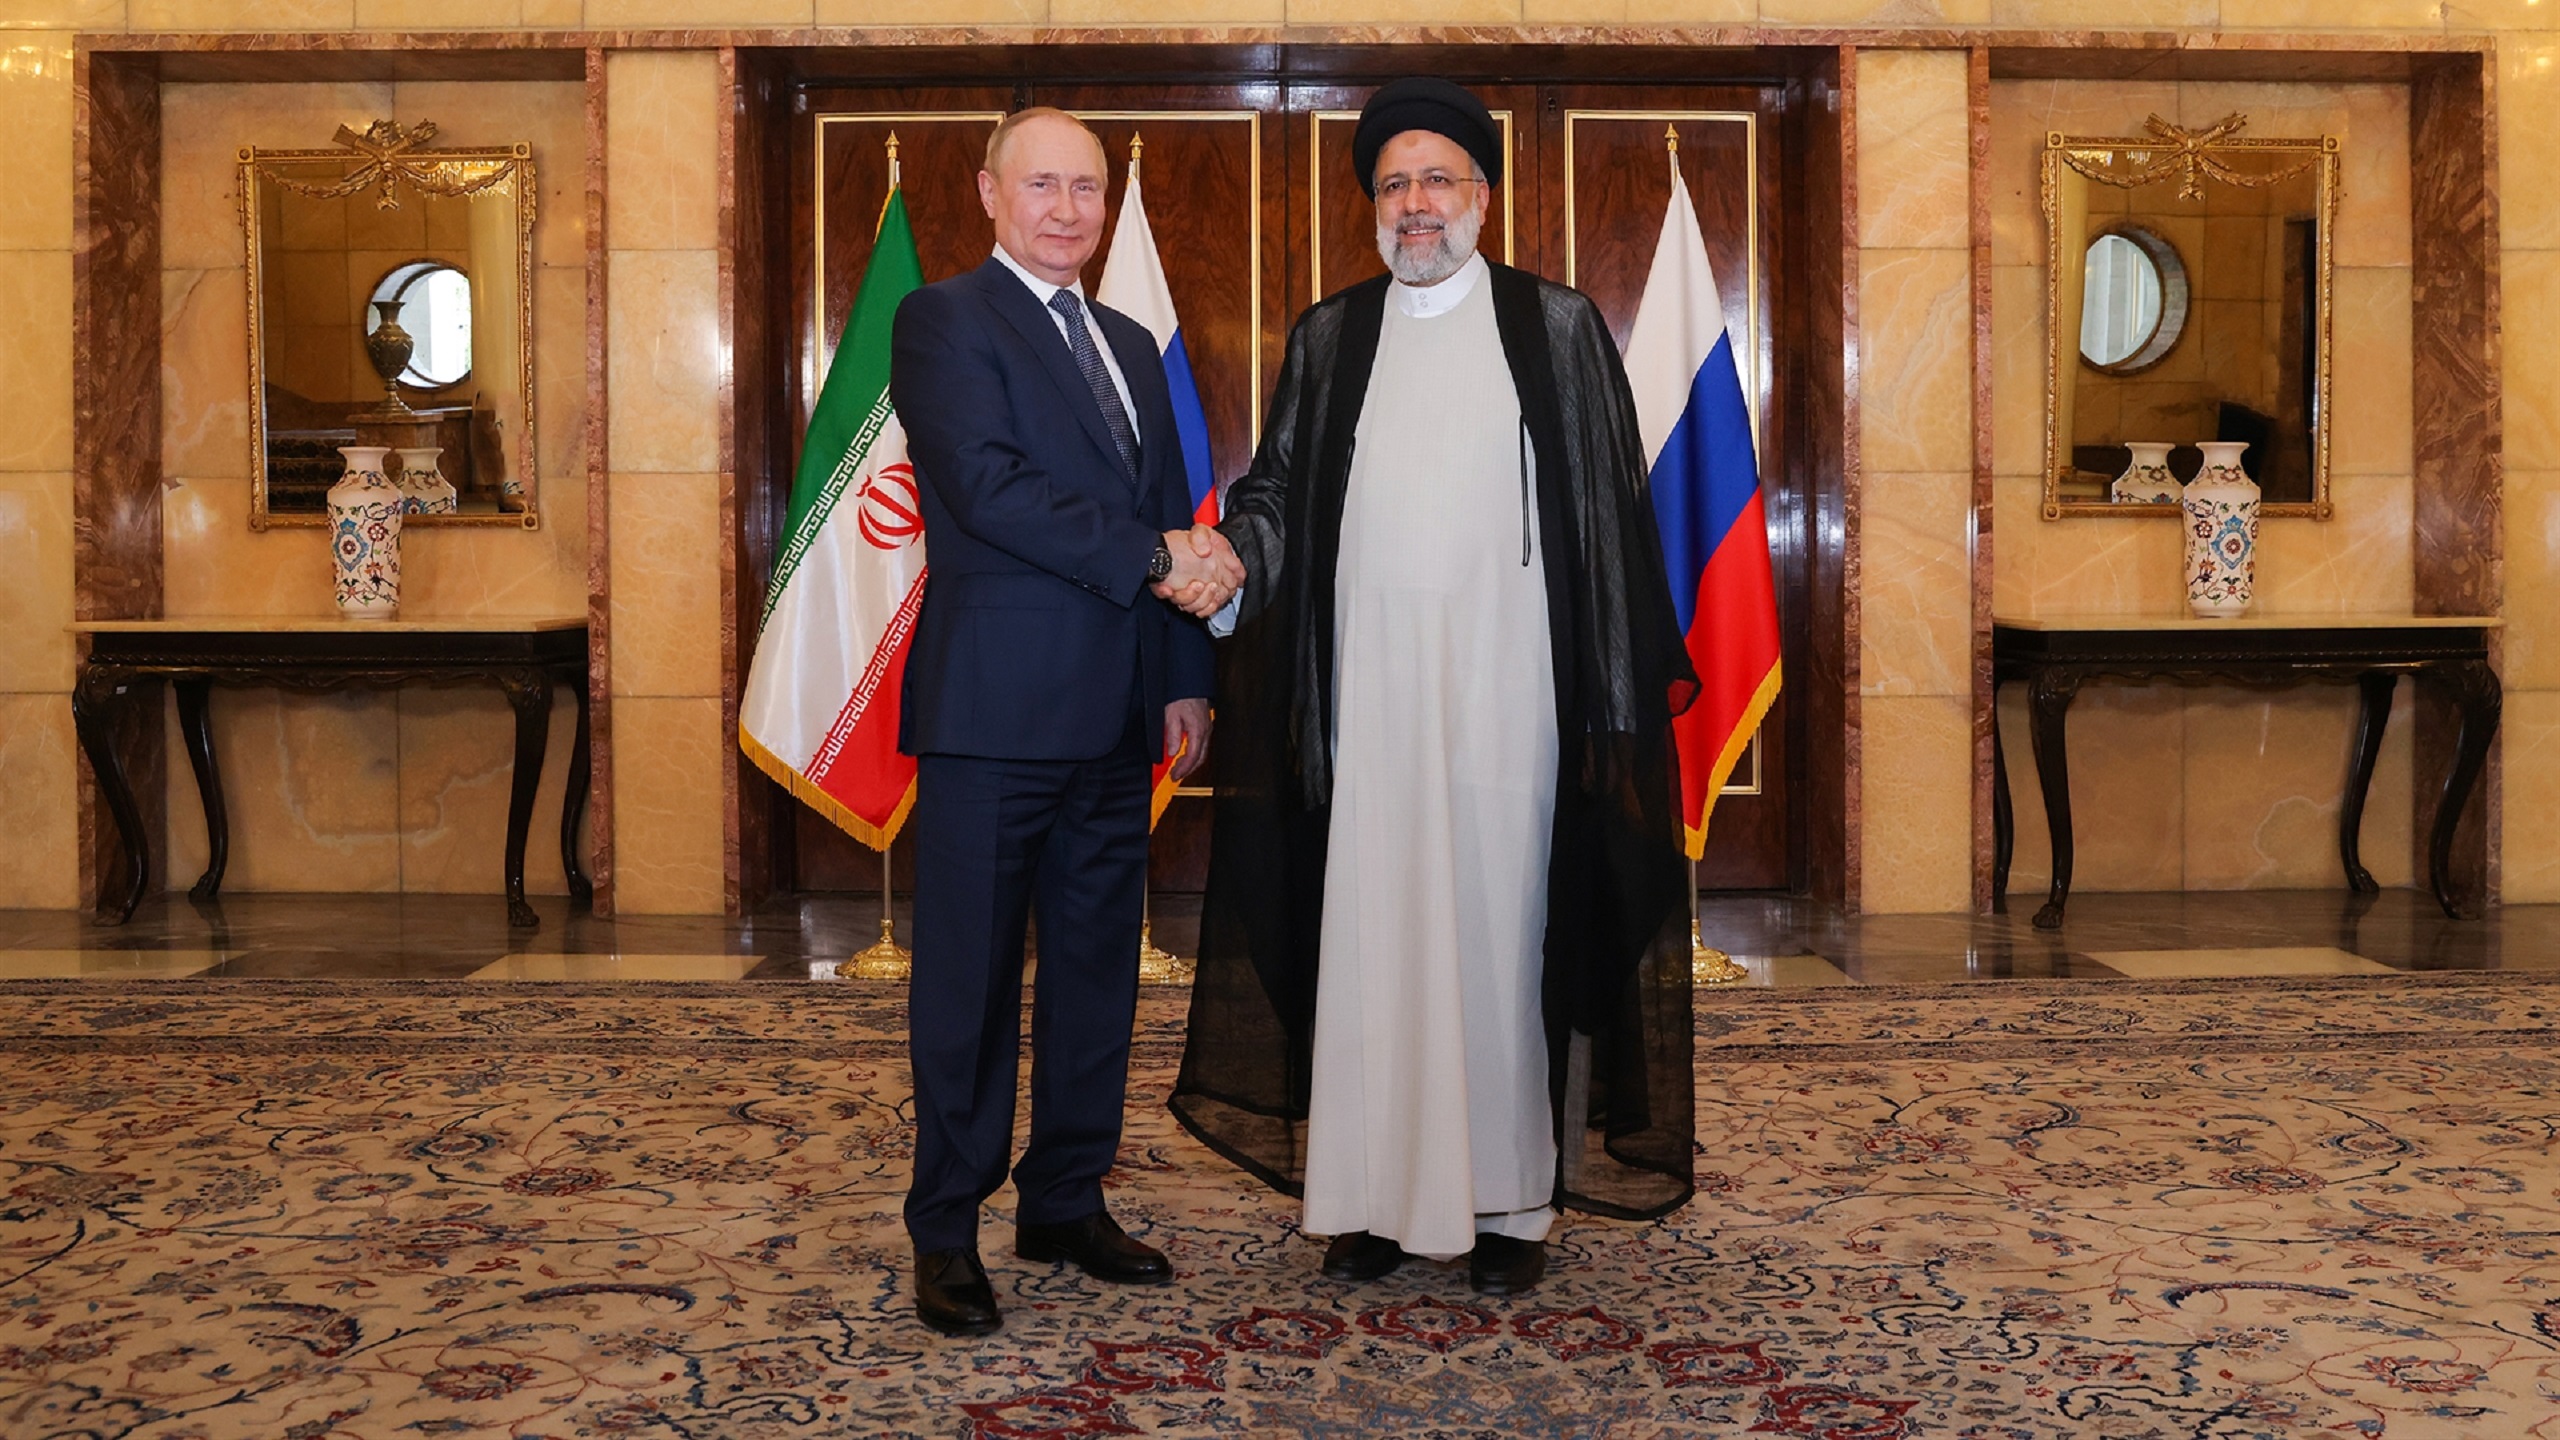 Russia To Invest $40B in Iran’s Oil Industry